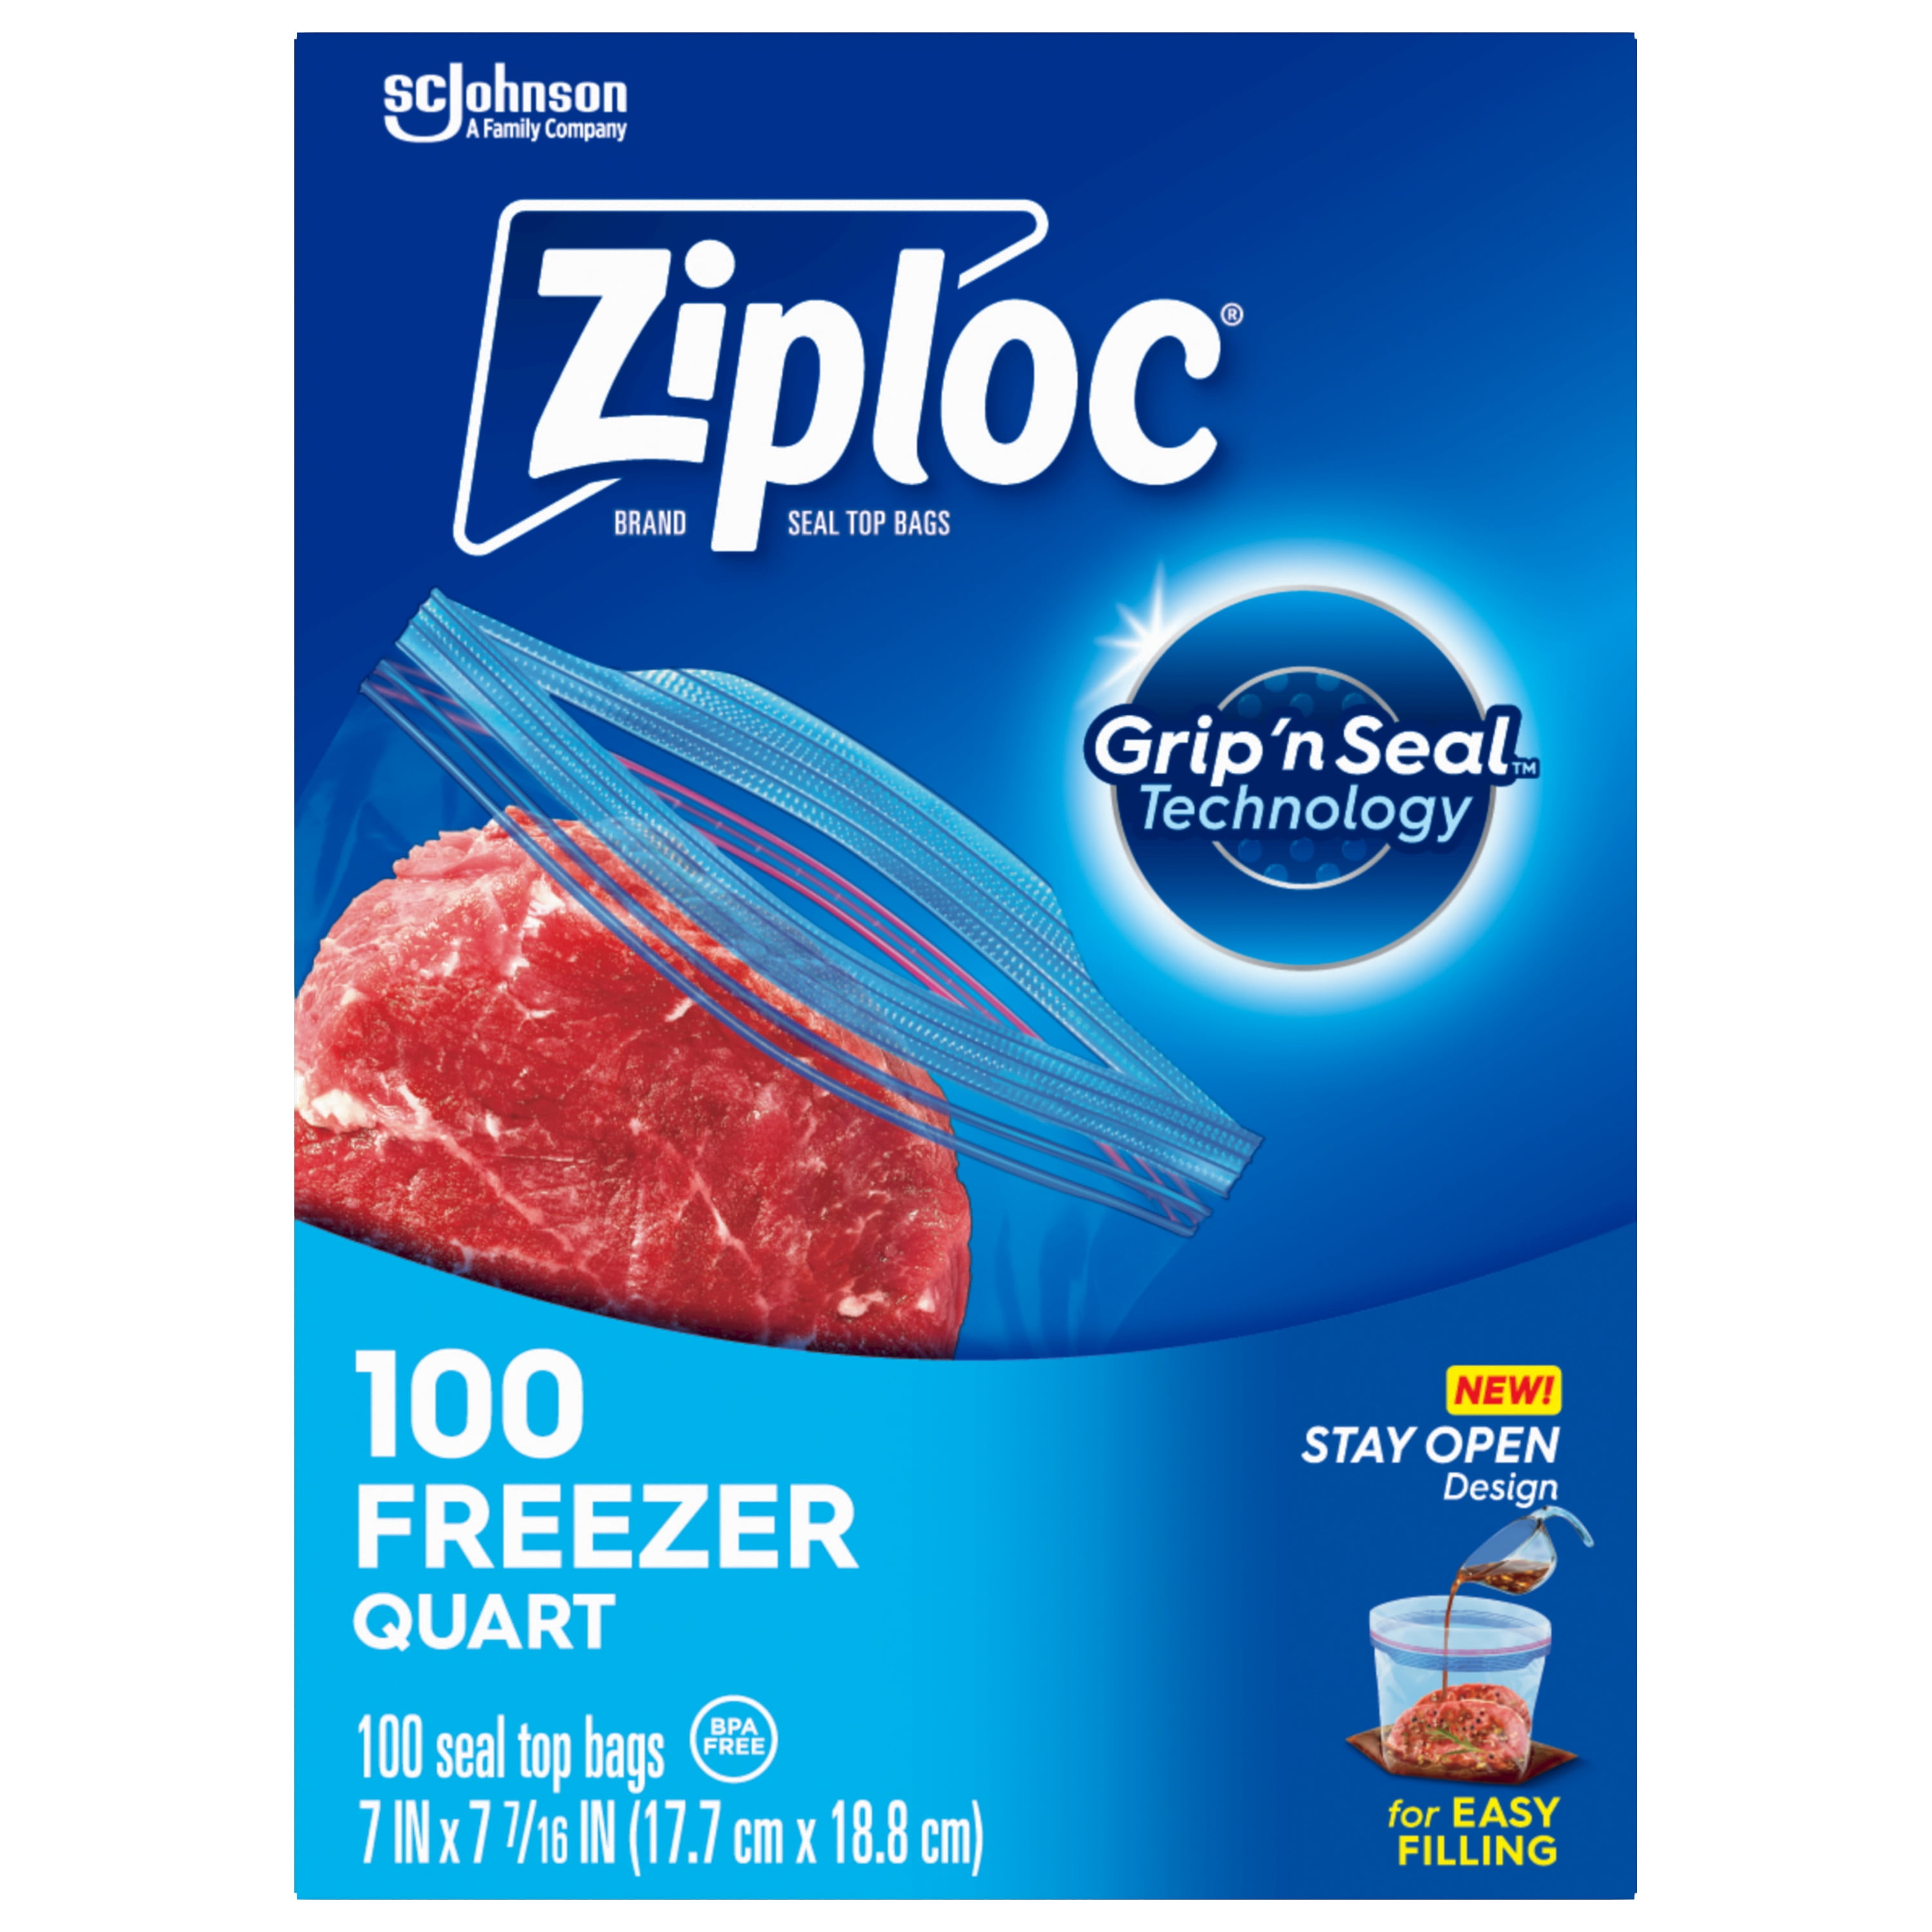  Ziploc Gallon Food Storage Freezer Bags, New Stay Open Design  with Stand-Up Bottom, Easy to Fill, 60 Count : Health & Household